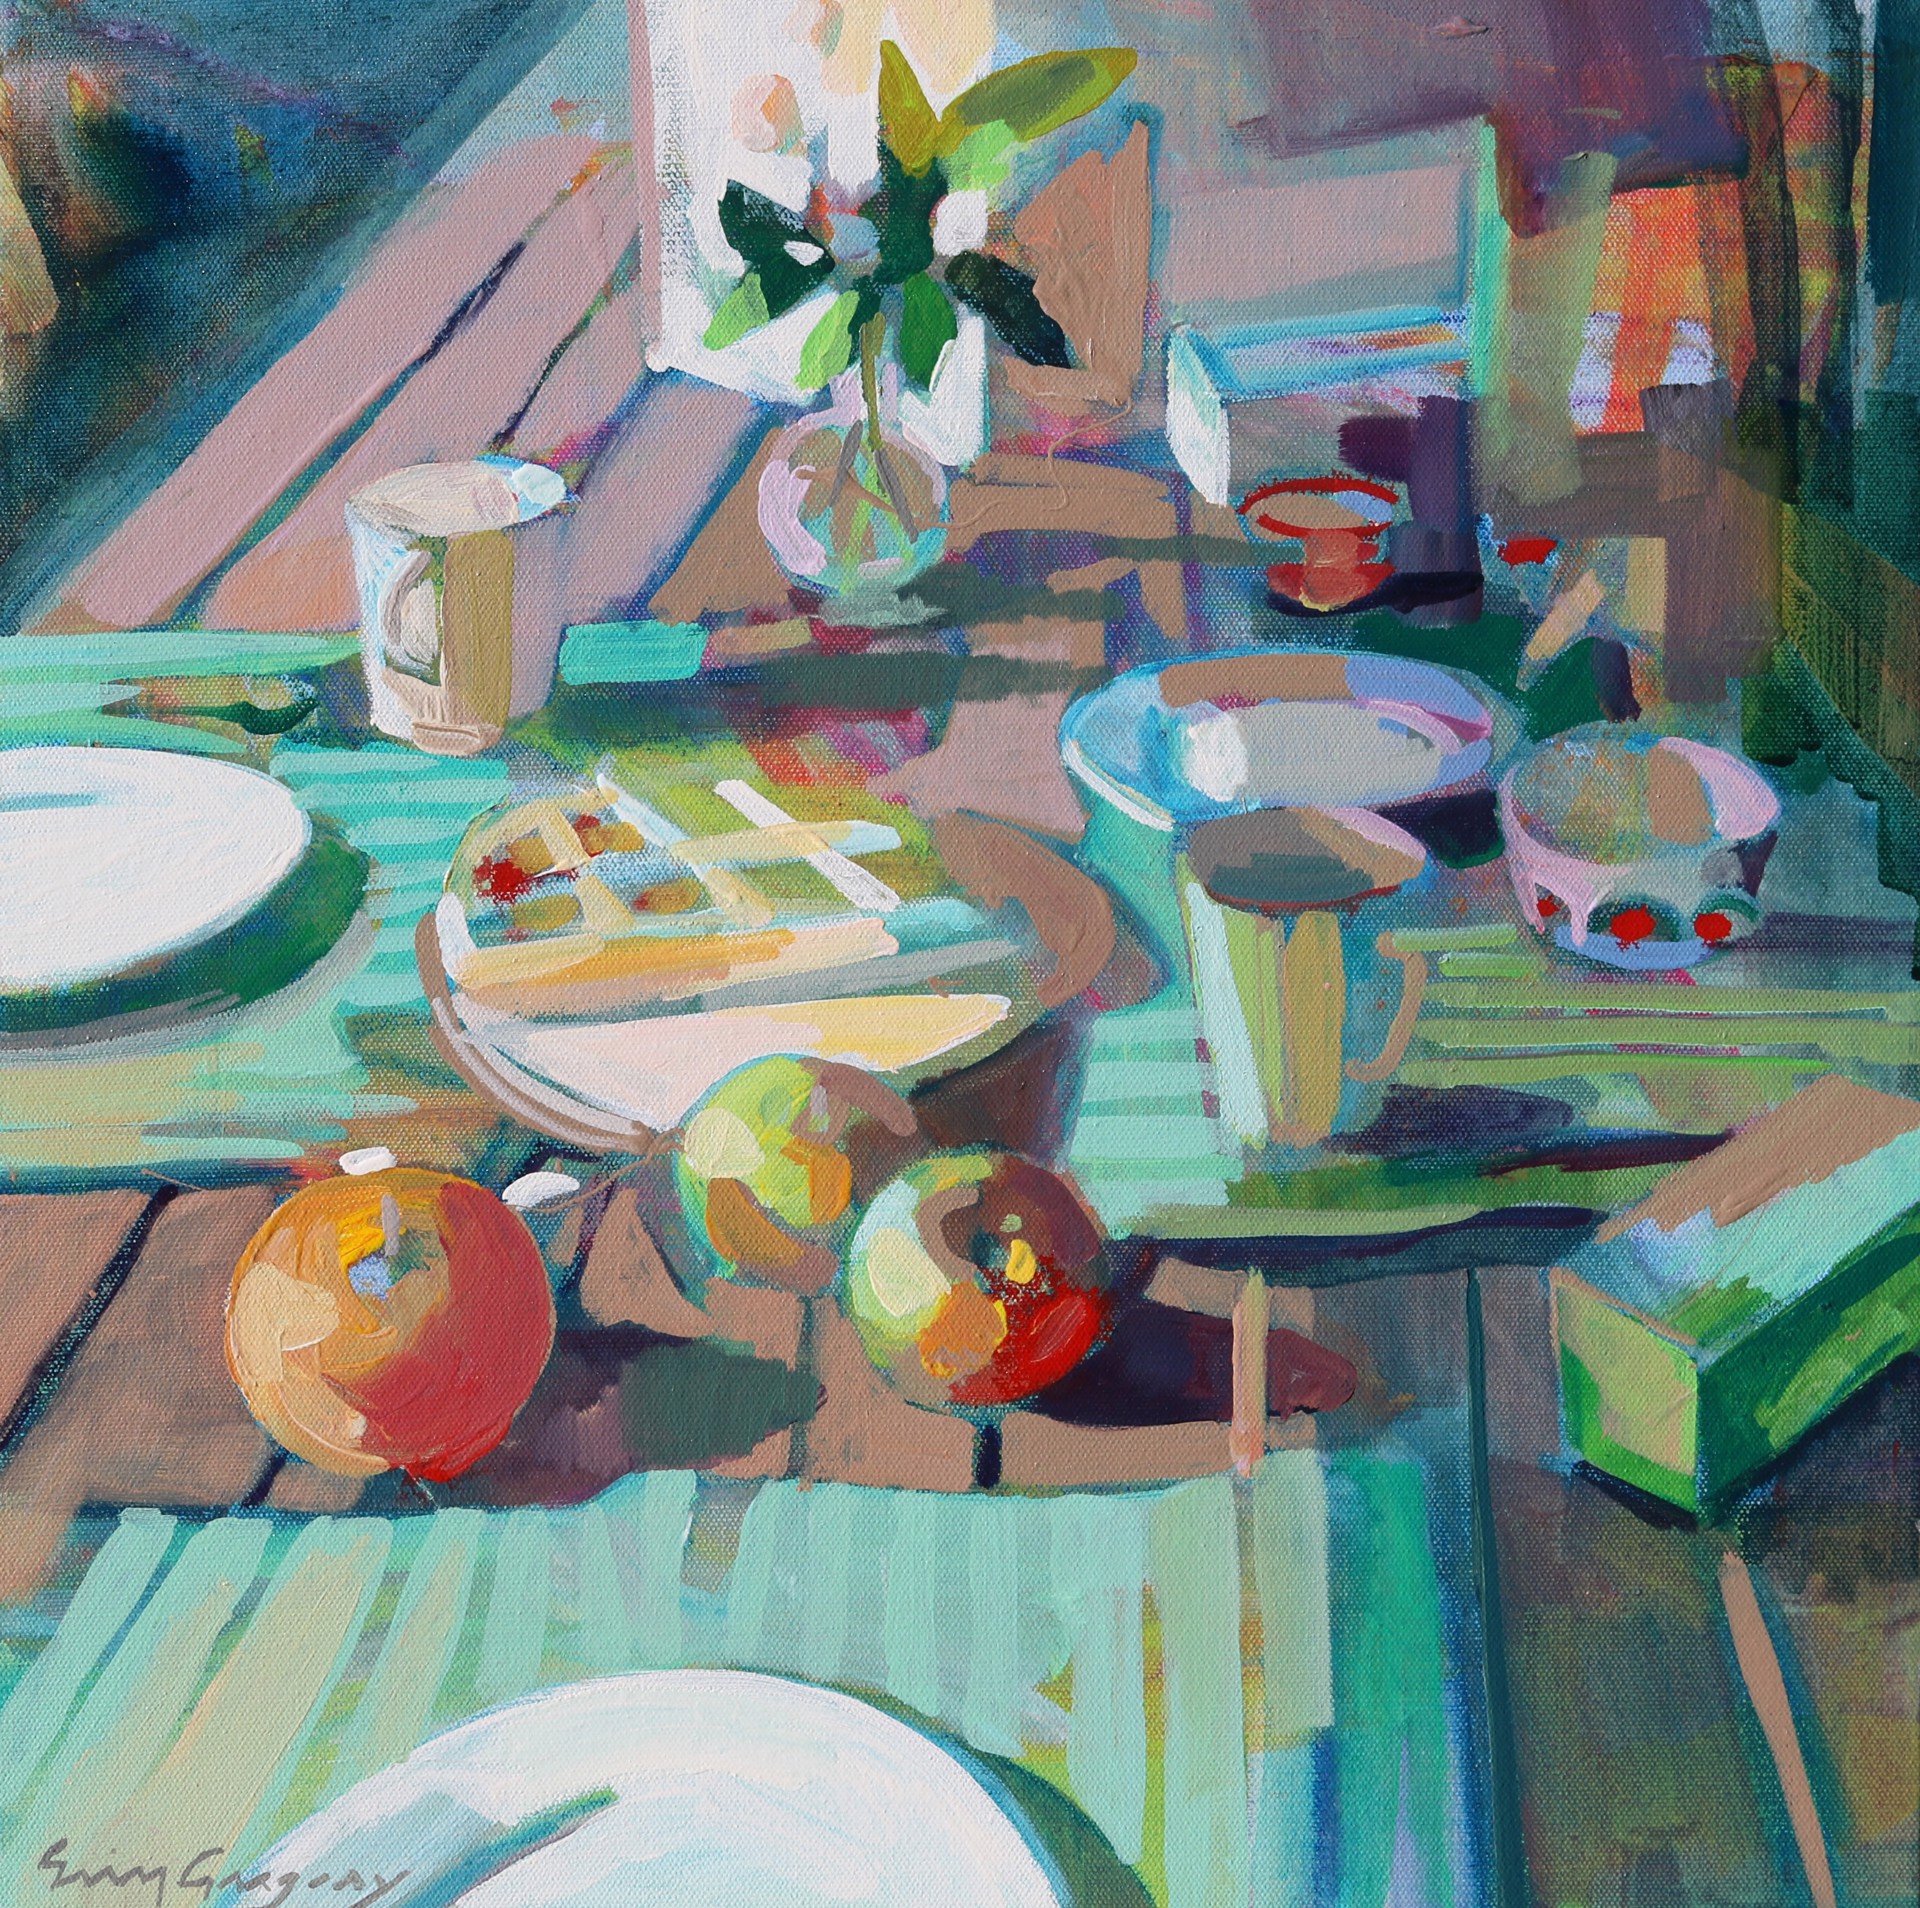 The Breakfast Table 2 by Erin Gregory